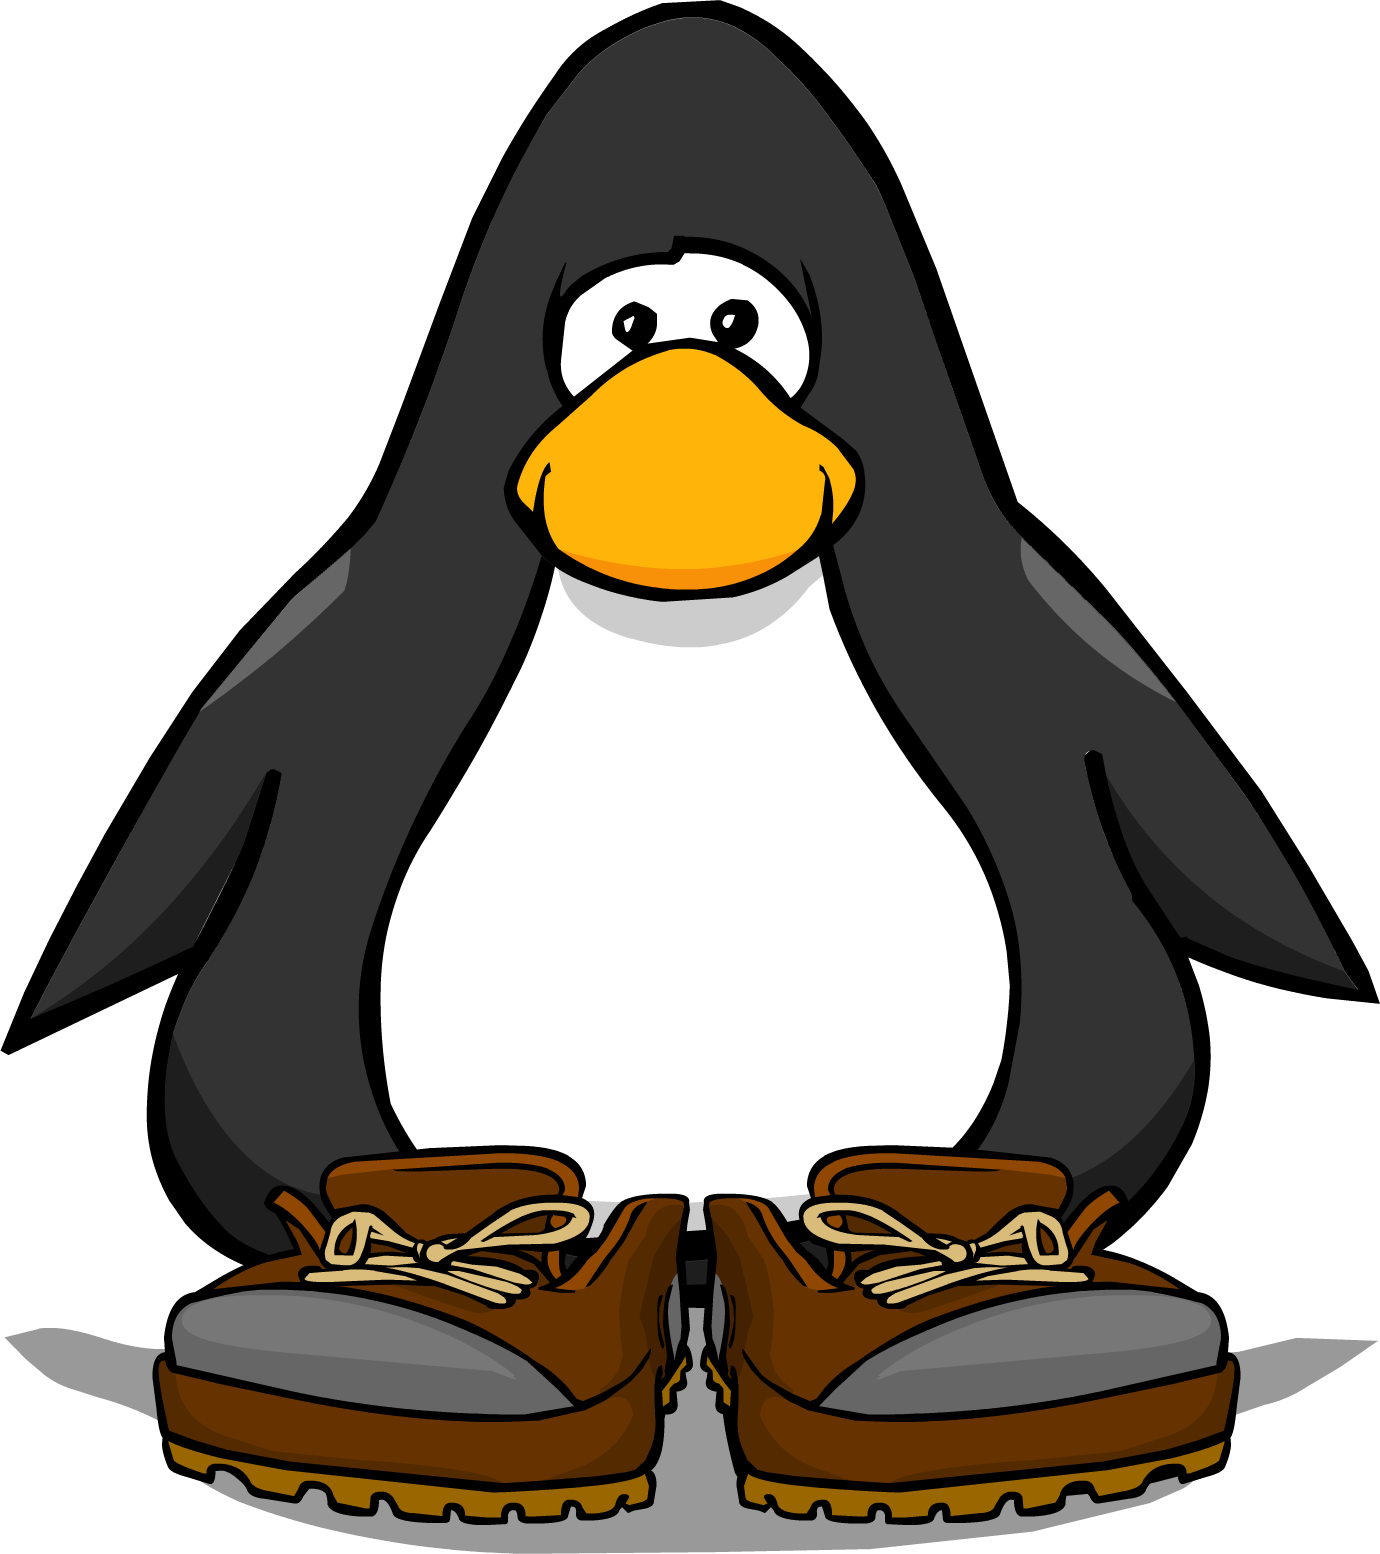 Hiking Boots From A Player Card - Club Penguin Boa (1380x1554)